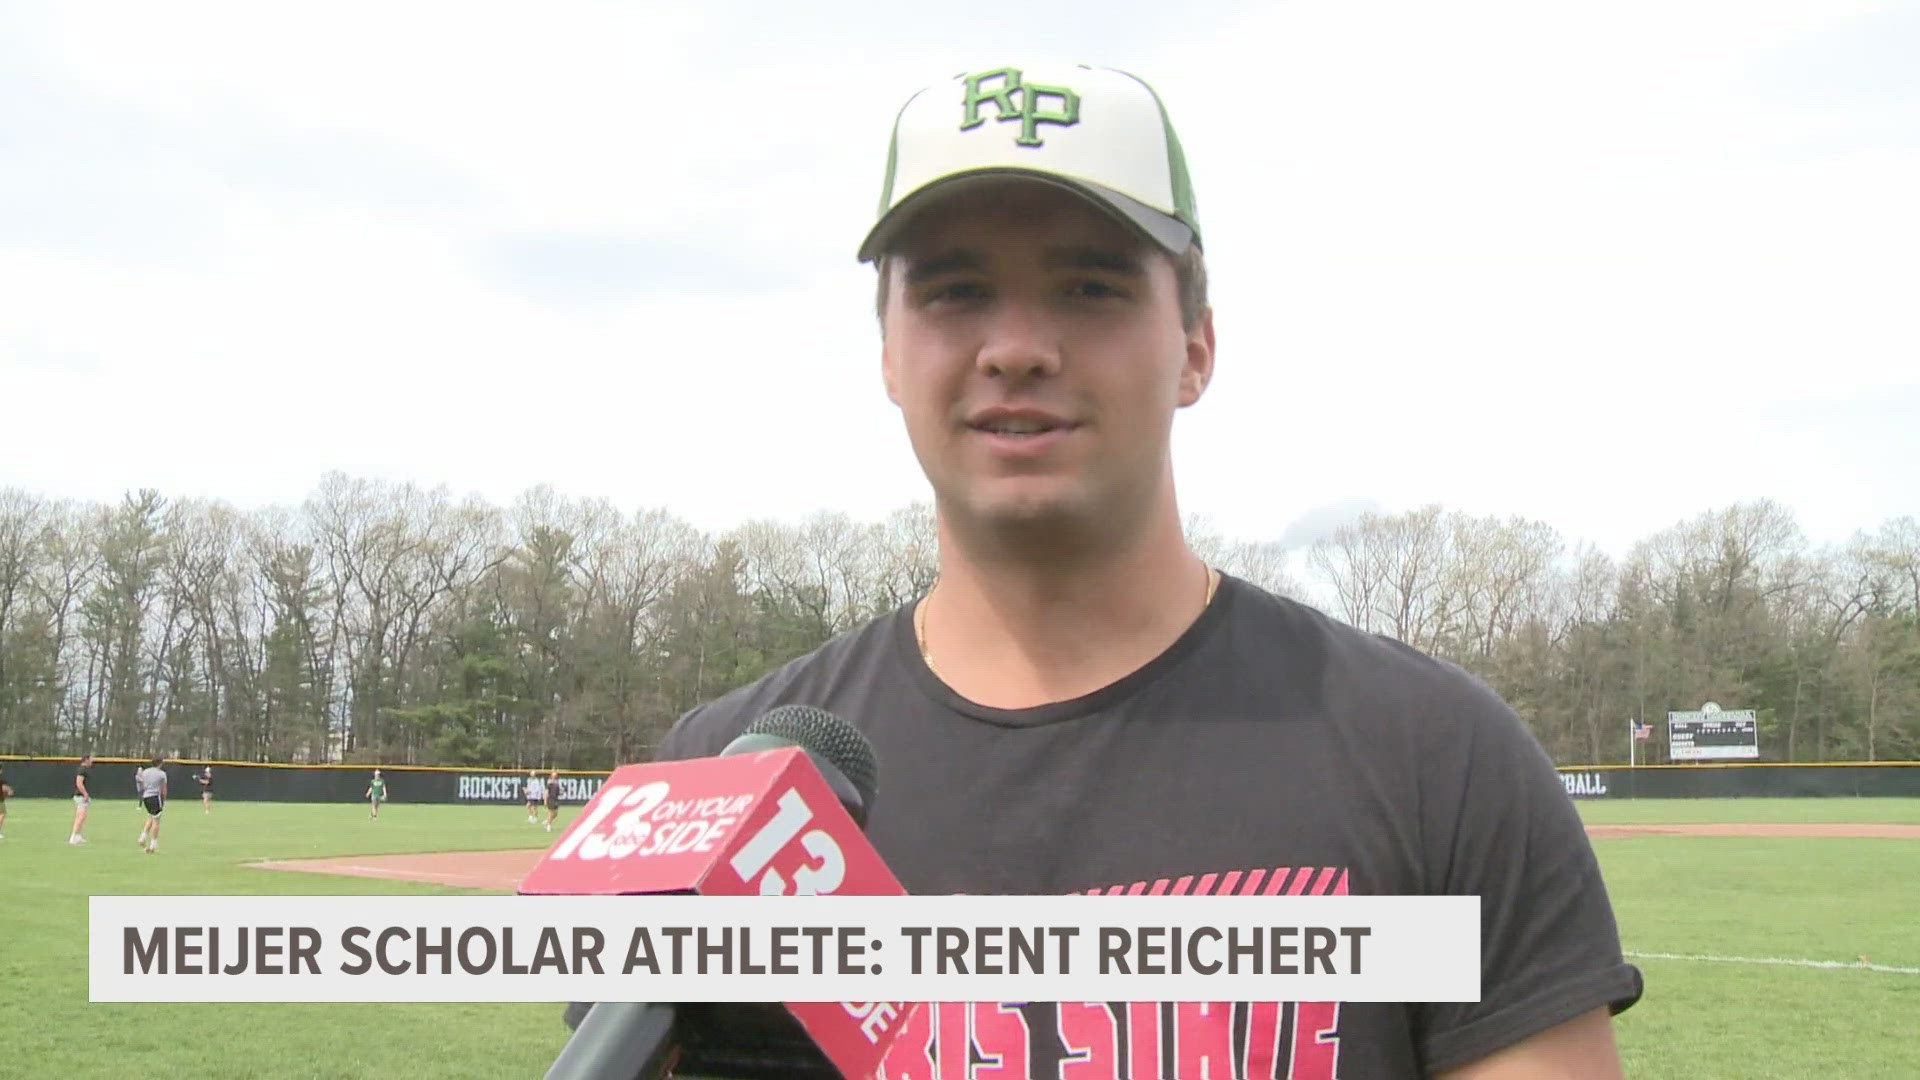 Reichert is a captain of the Reeths-Puffer baseball team and will graduate in the spring with a 4.2 GPA.